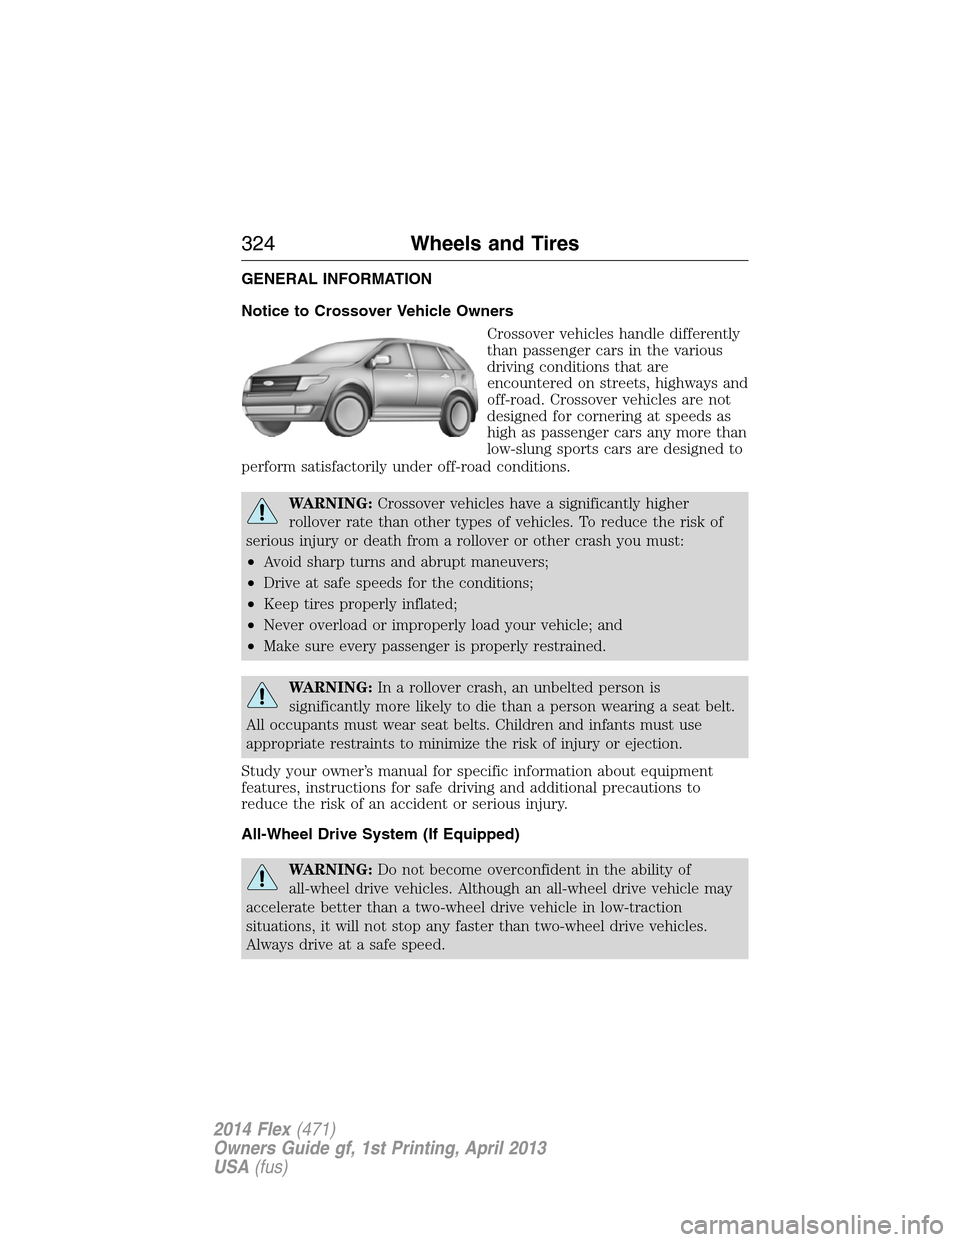 FORD FLEX 2014 1.G Owners Manual GENERAL INFORMATION
Notice to Crossover Vehicle Owners
Crossover vehicles handle differently
than passenger cars in the various
driving conditions that are
encountered on streets, highways and
off-roa